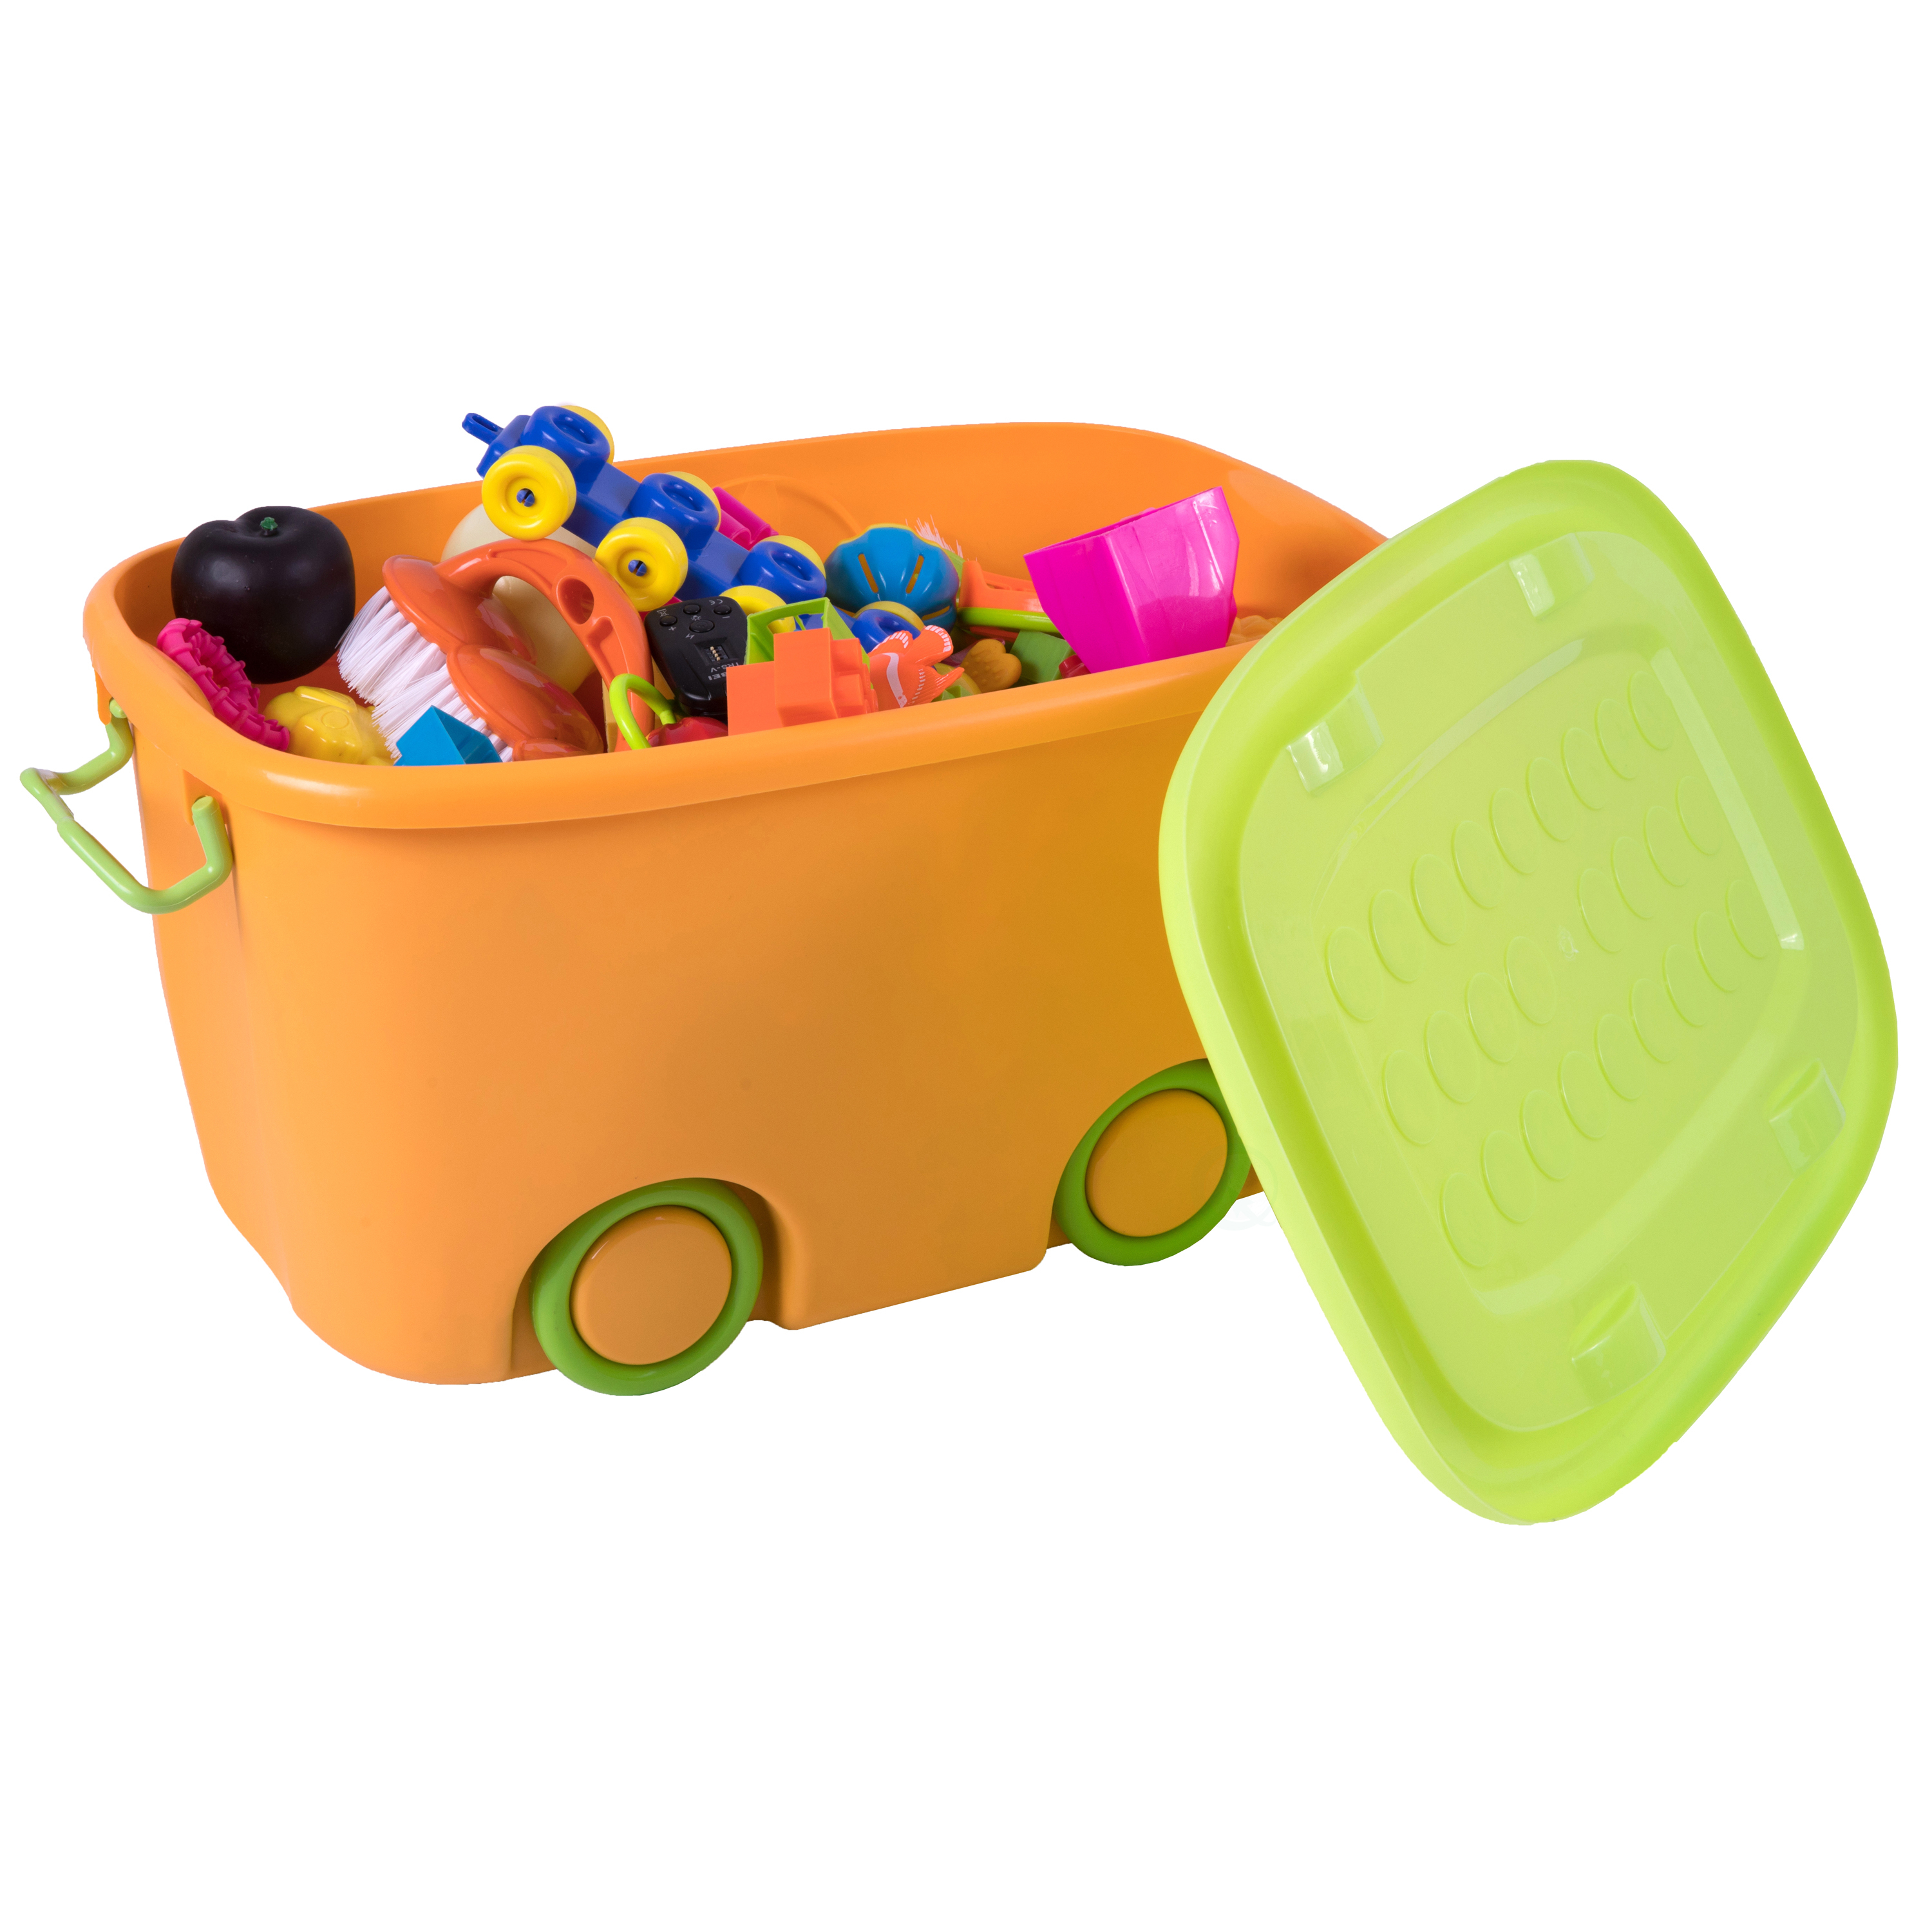 Stackable Toy Storage Box With Wheels - Large Orange